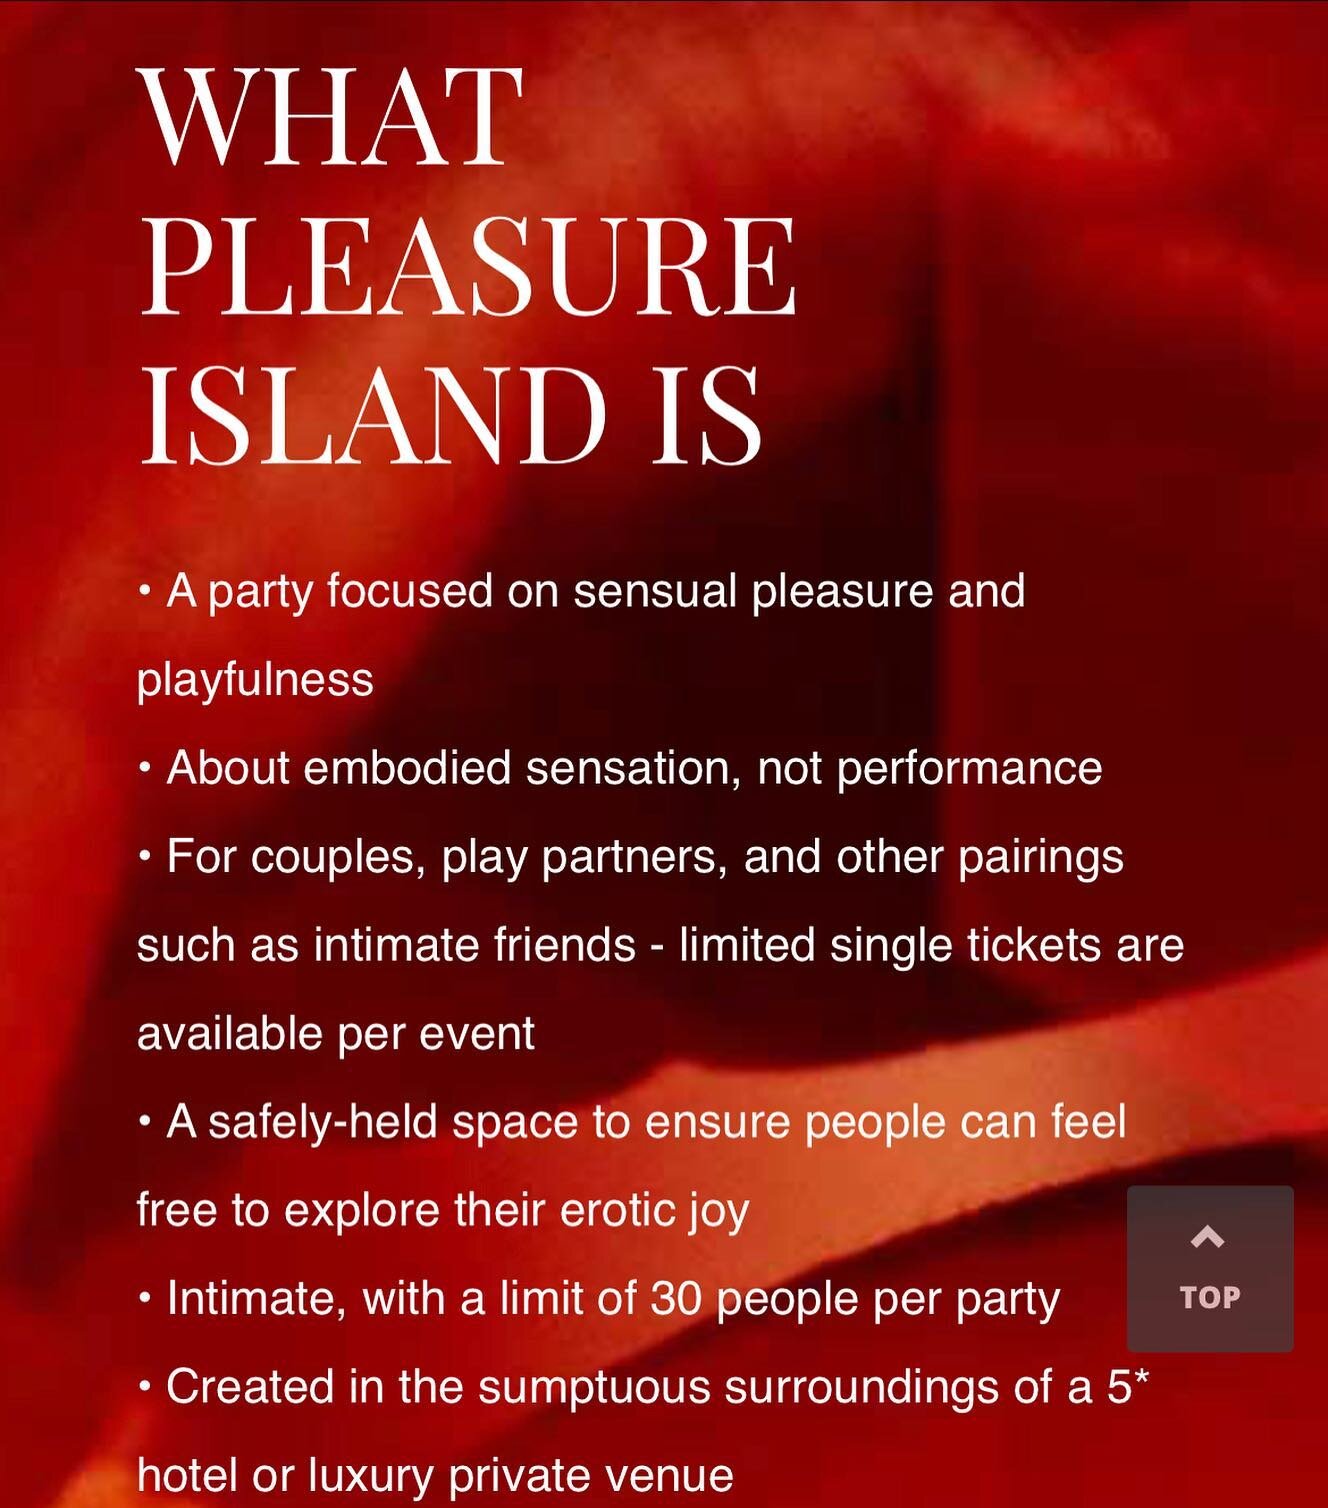 Pleasure Island Parties - first one since lockdown is tonight!
.
Hello Pleasure Seekers
 
We are super excited to have our first parties this Friday and Saturday after what seems like aaaaaages!

This is just a little heads up to say we will be putti